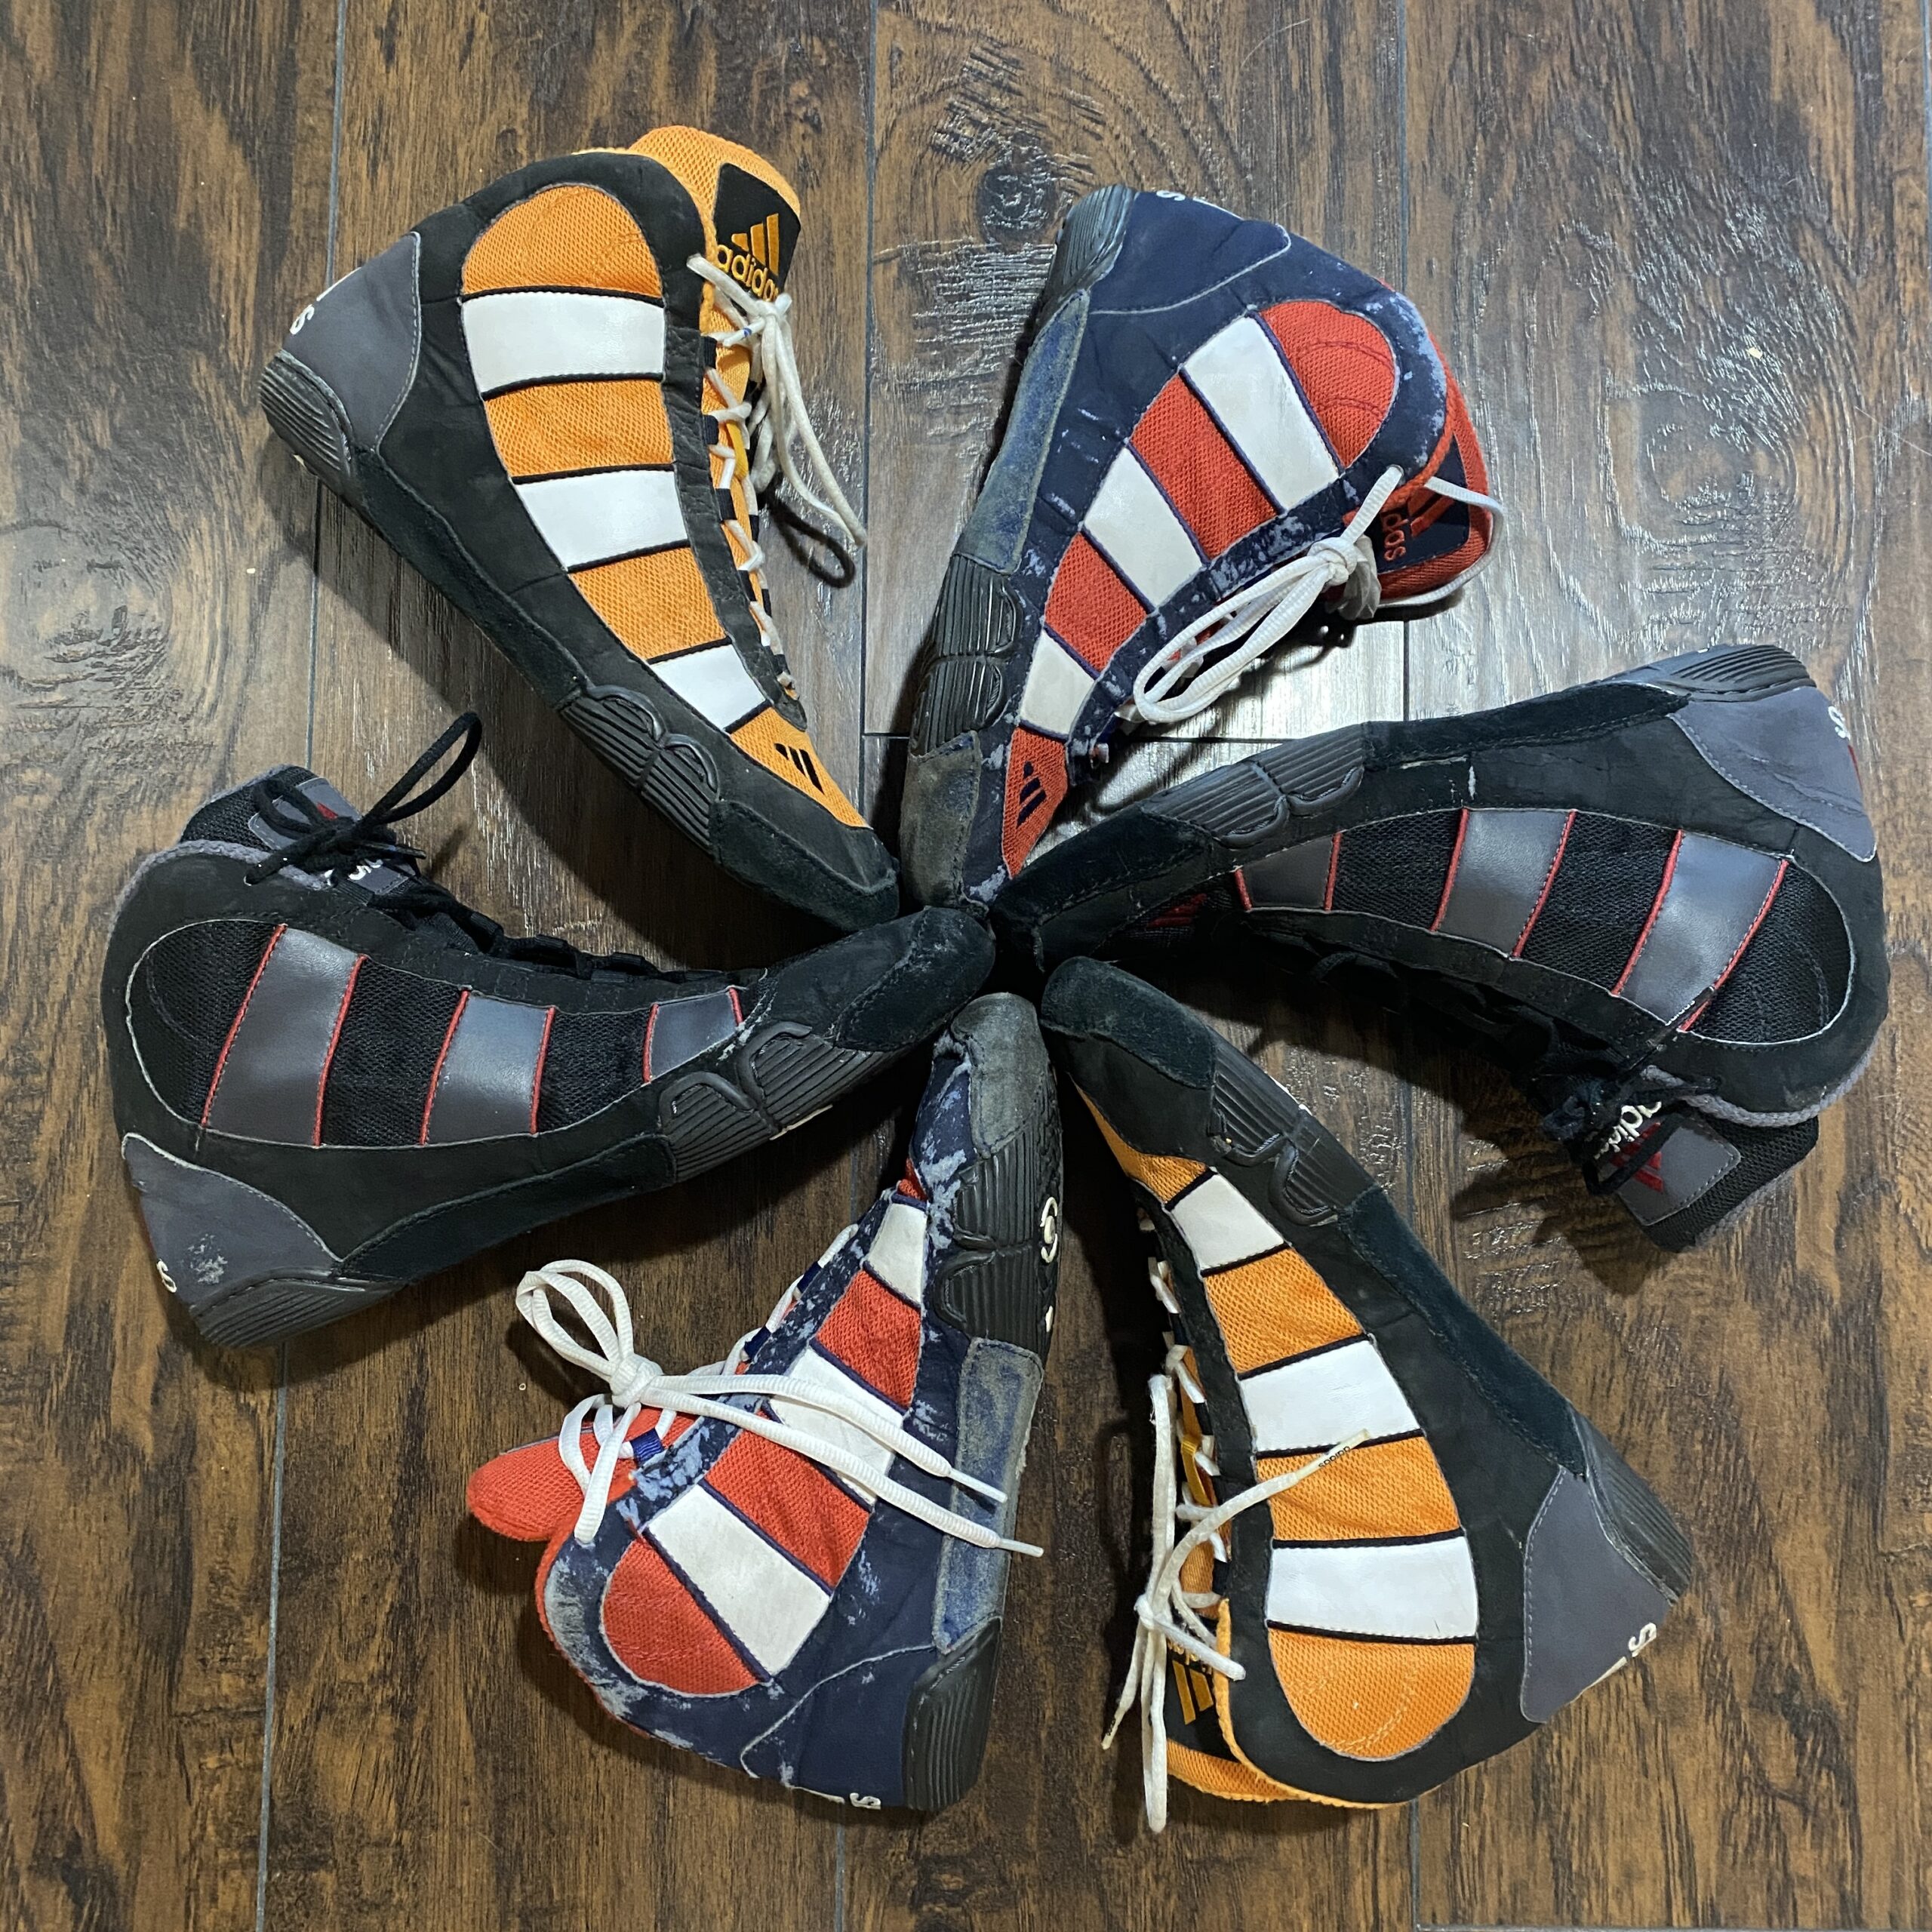 3 colors of adidas g response wrestling shoes